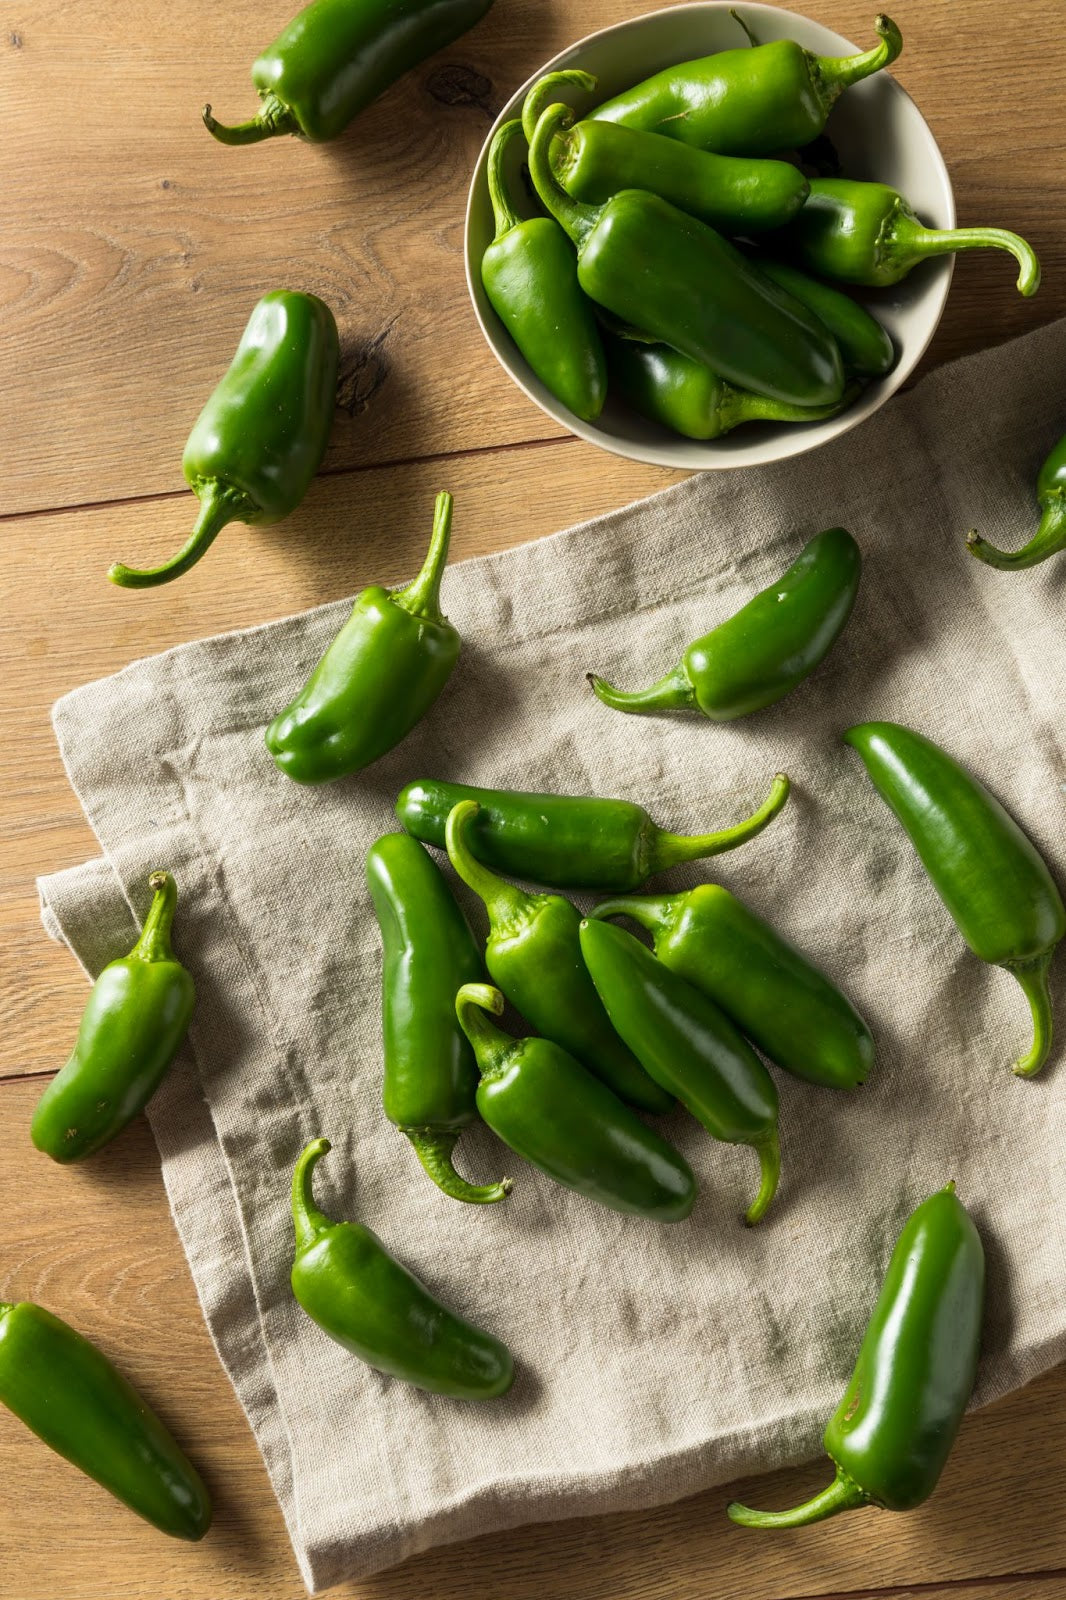 Fresh jalapenos grown from seeds.